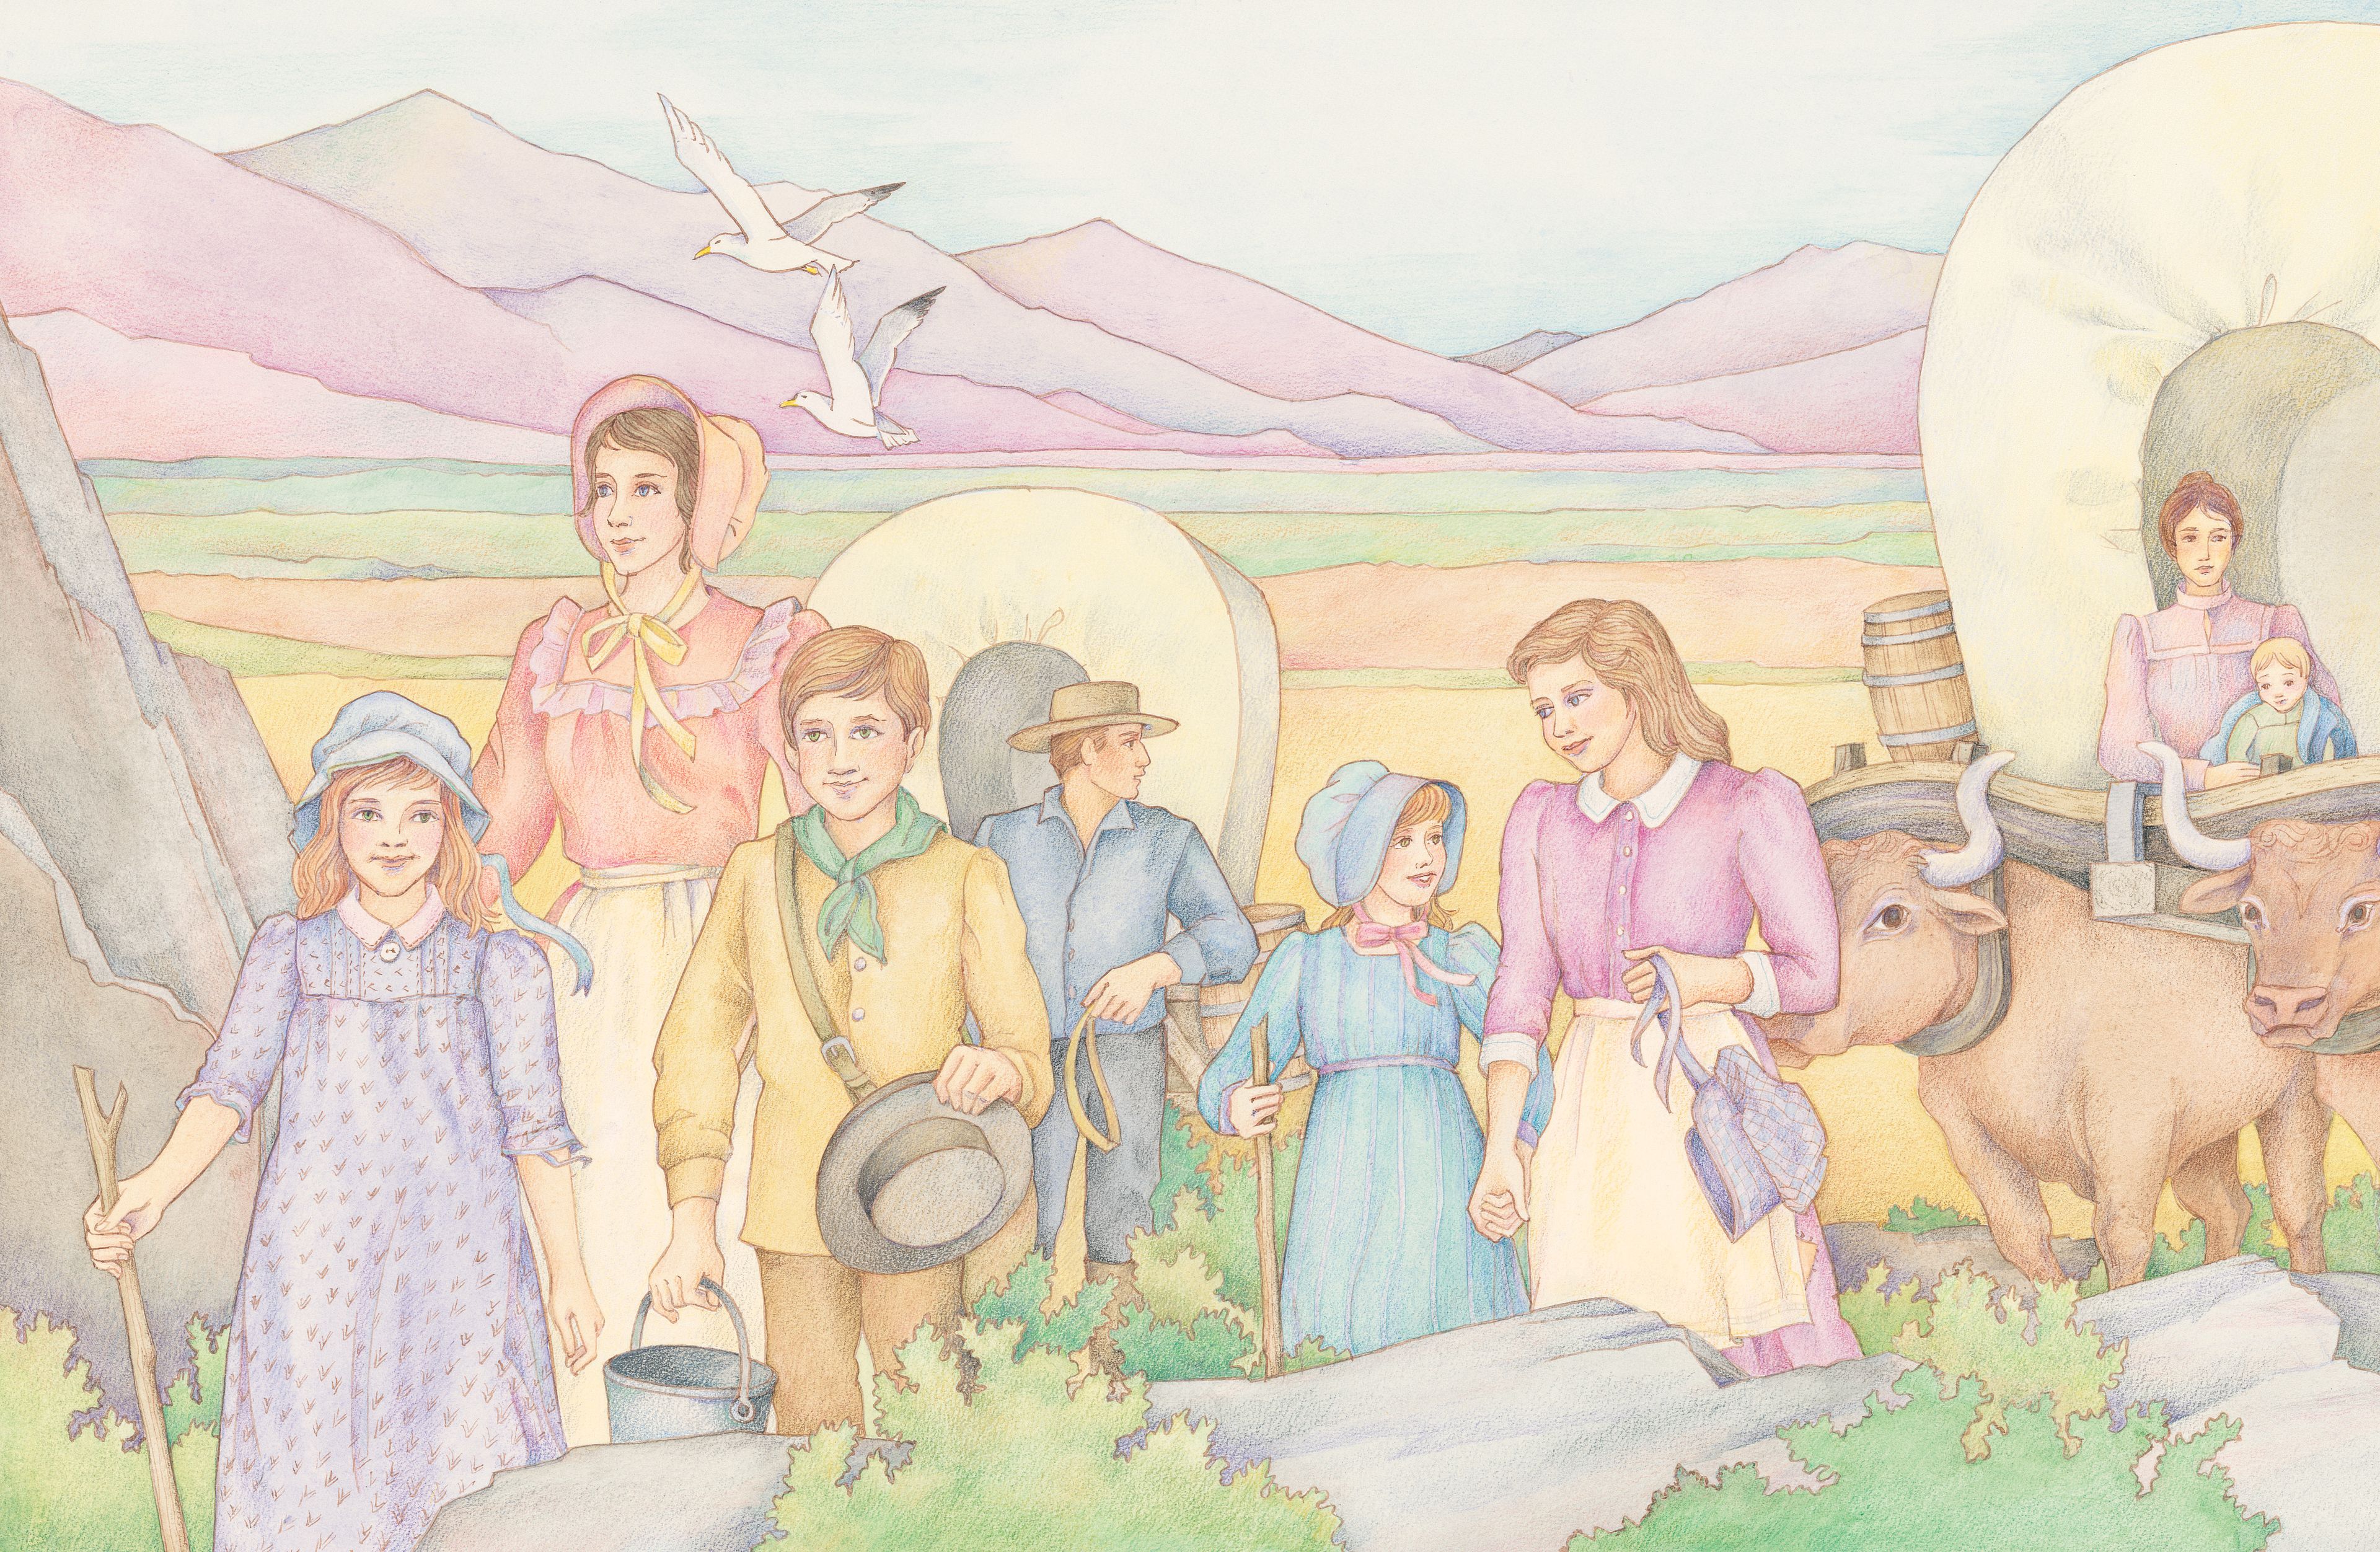 A group of pioneers traveling in covered wagons over the plains. From the section “Heritage” in the Children’s Songbook, pages 212–213; watercolor illustration by Phyllis Luch.